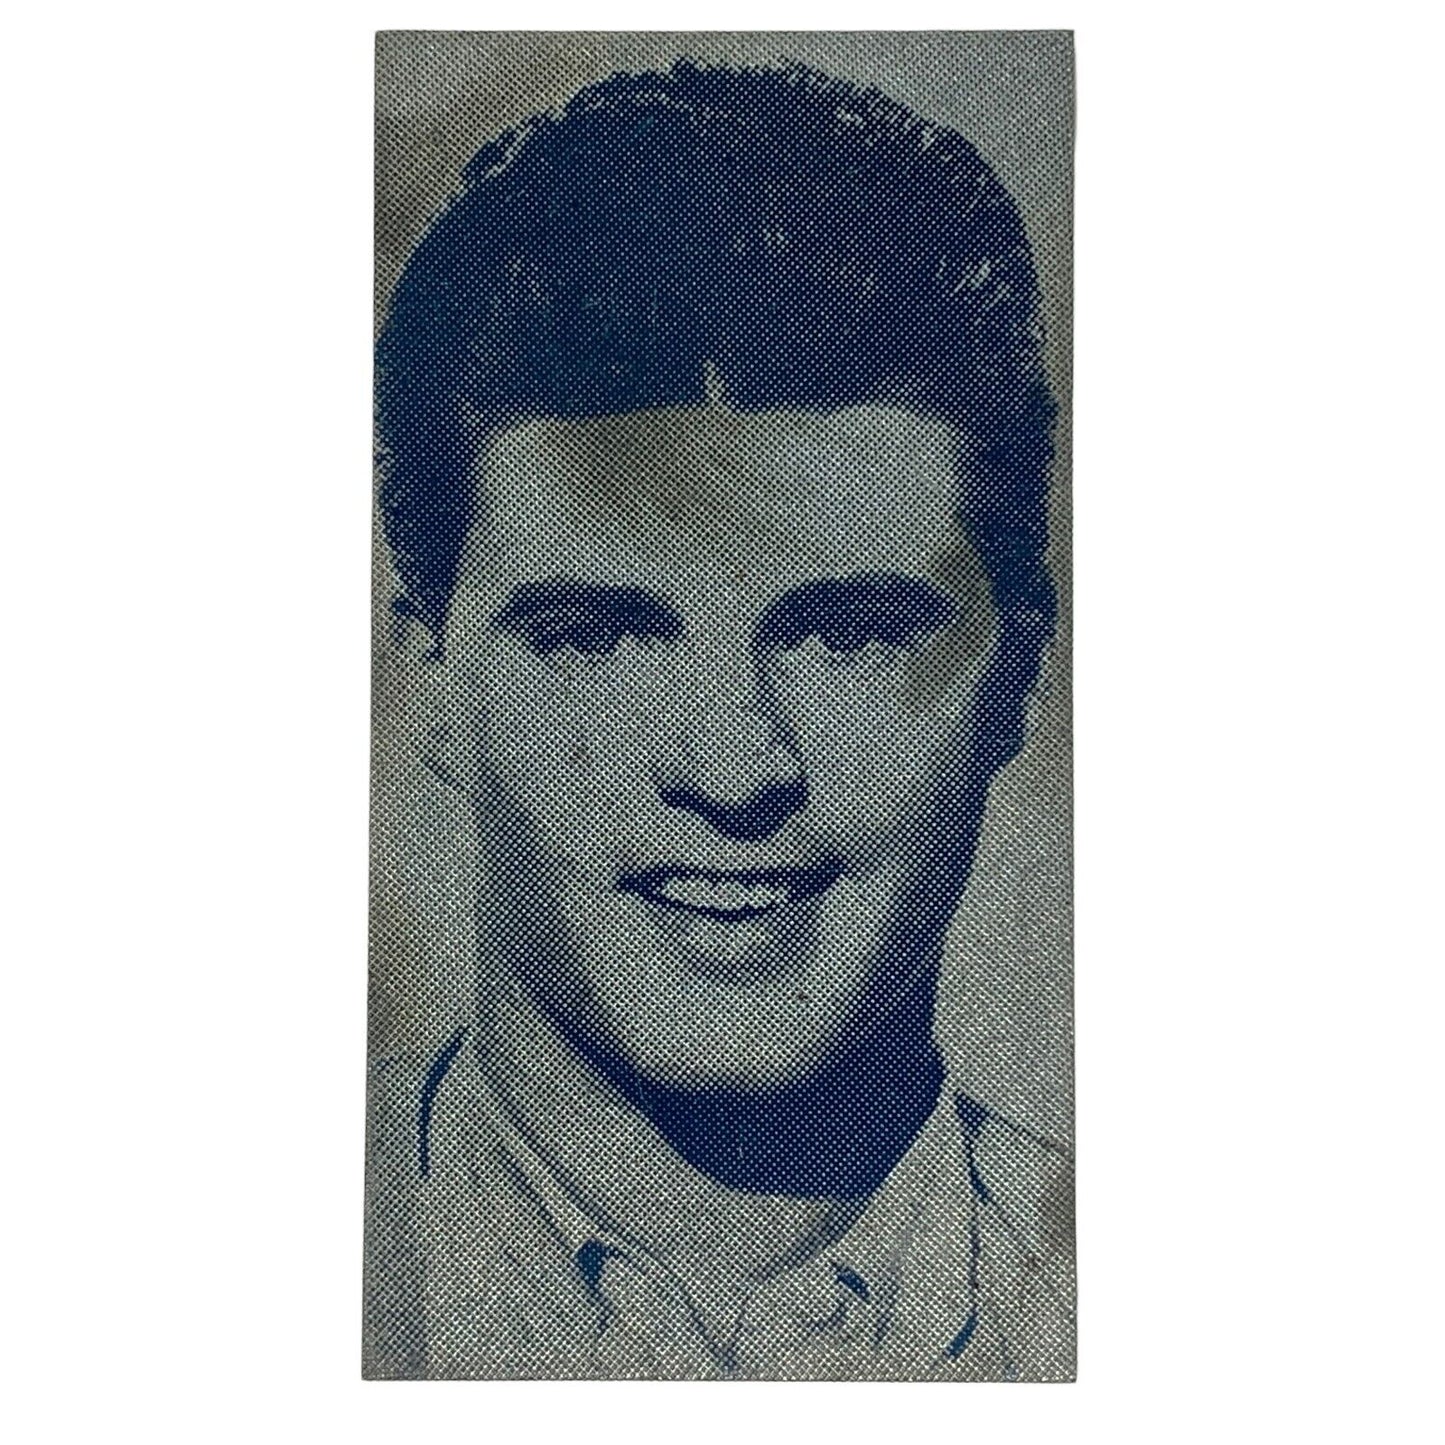 Ricky Nelson Newspaper Metal Printing Plate Photograph Rock Music Vintage 1961